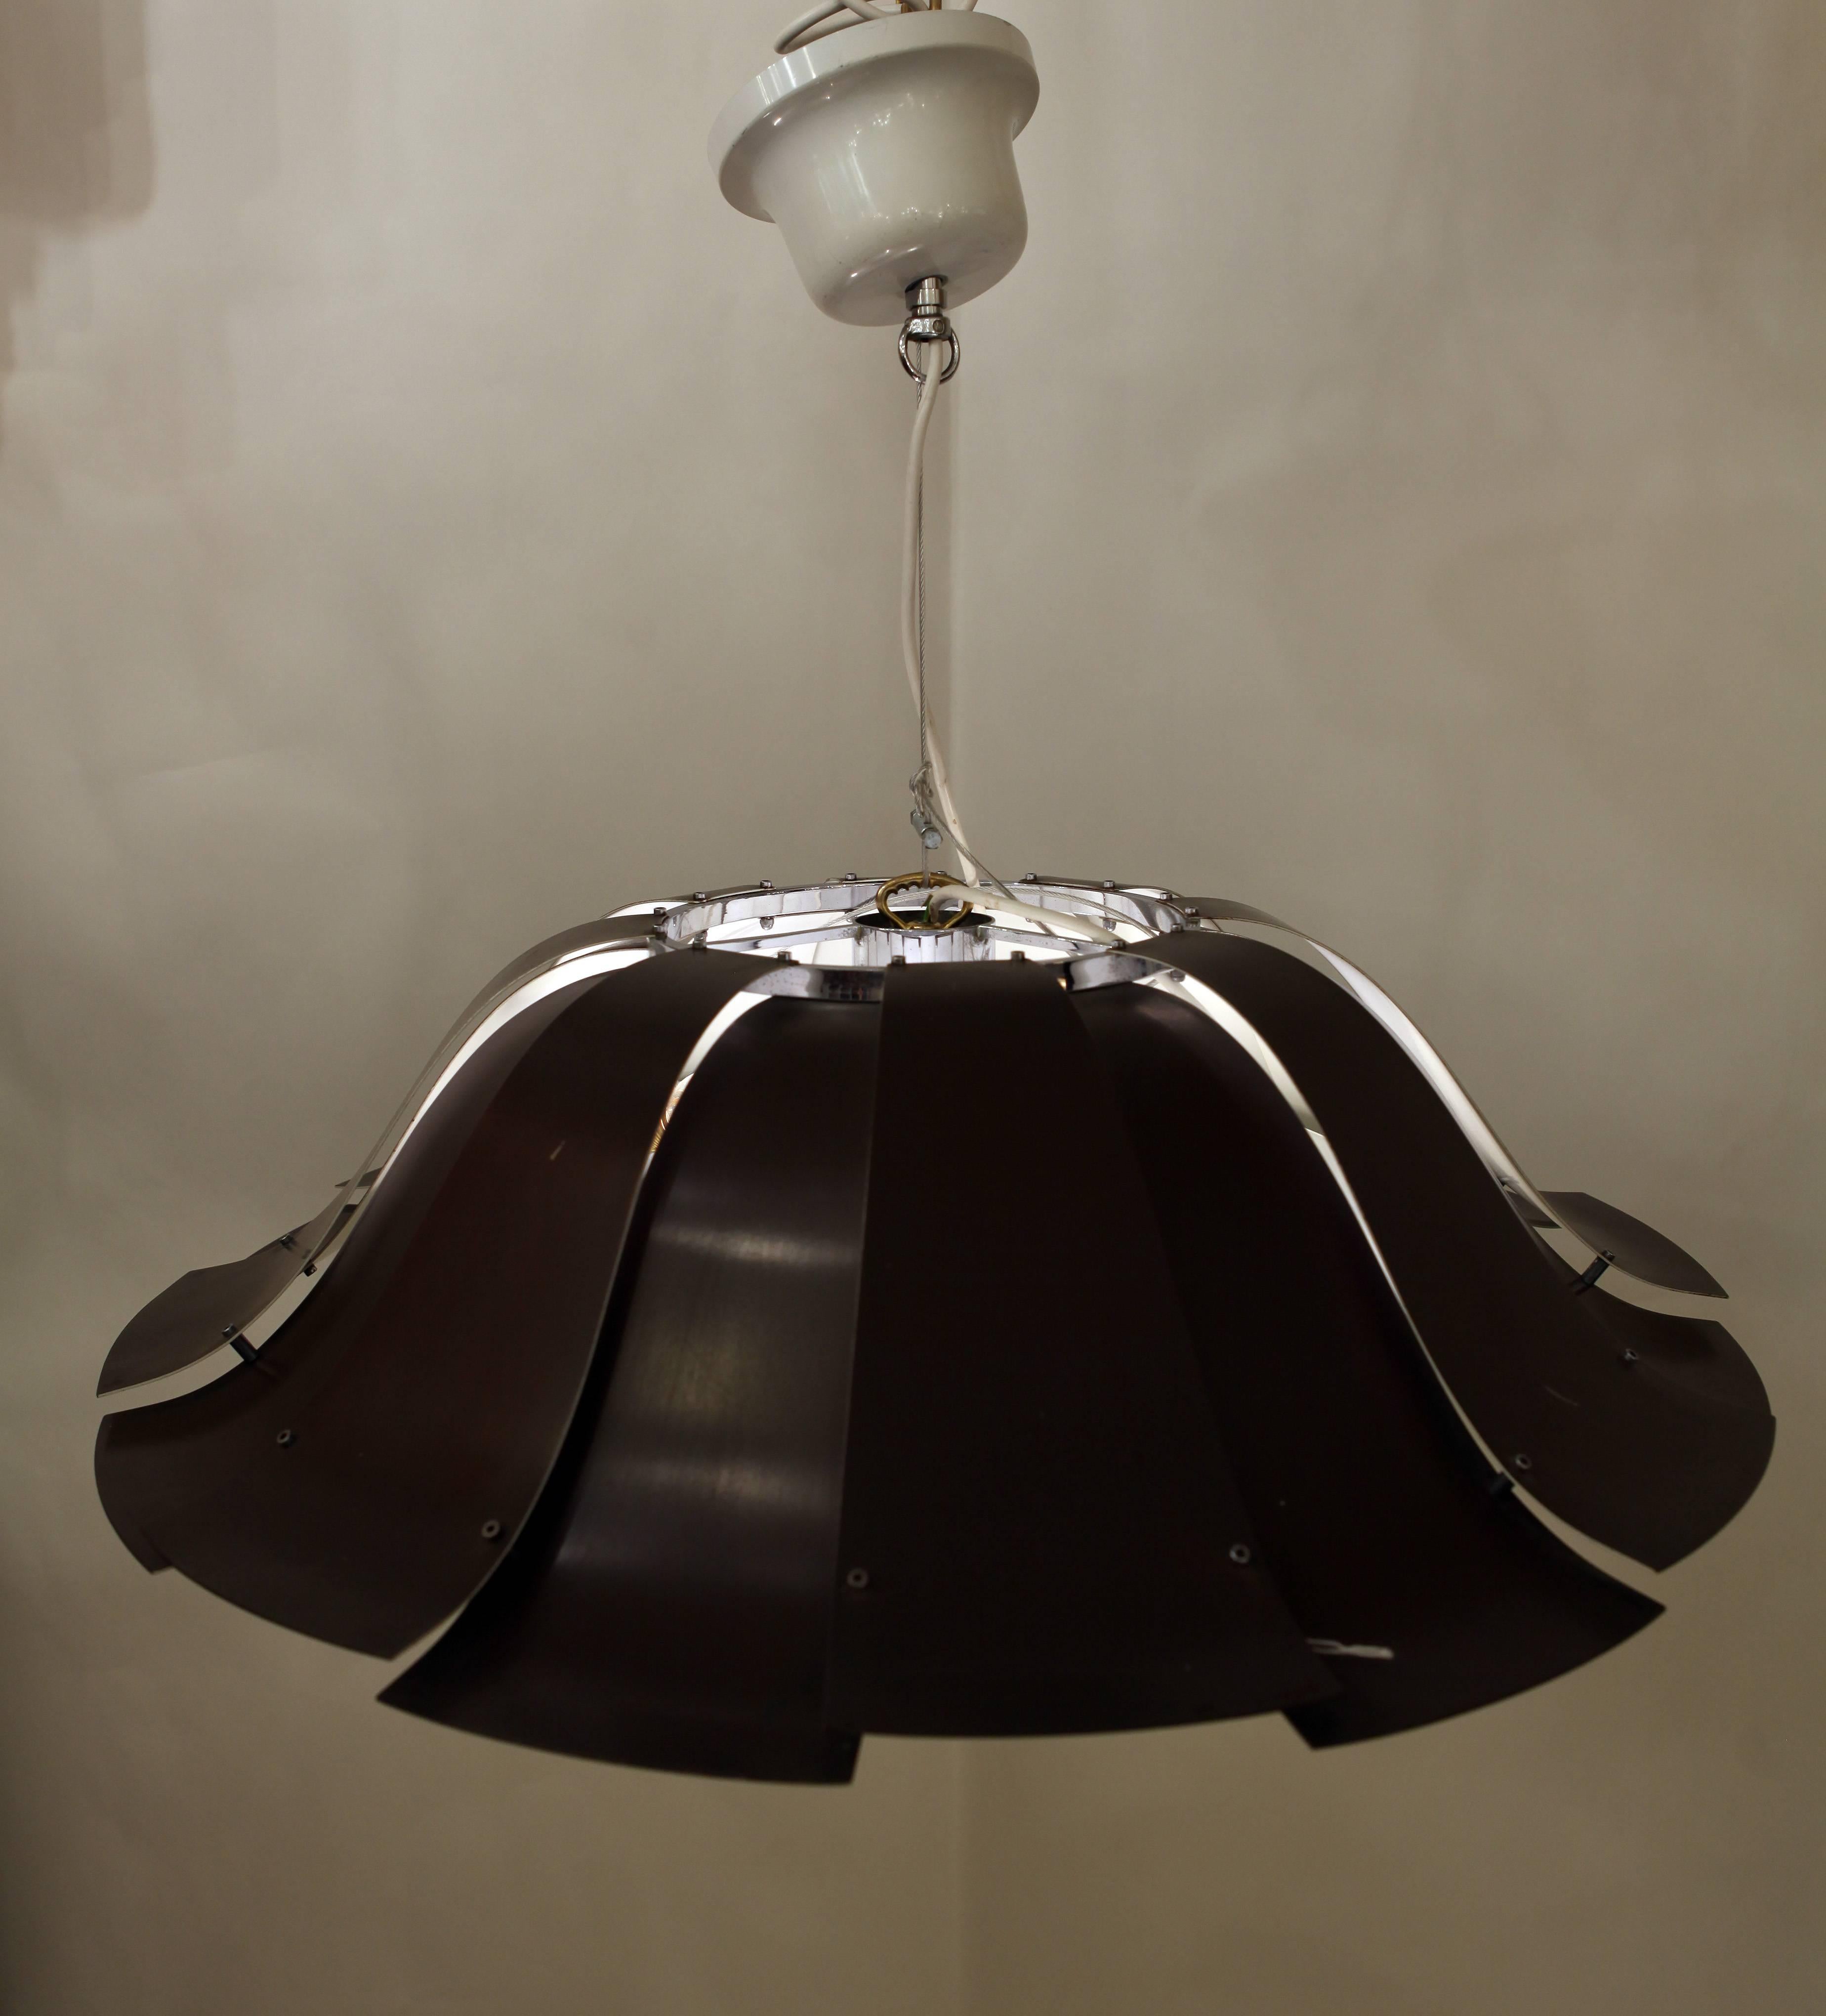 A beautiful Mid-Century Italian hanging lamp in brown and ivory painted metal.
*the height is without cable